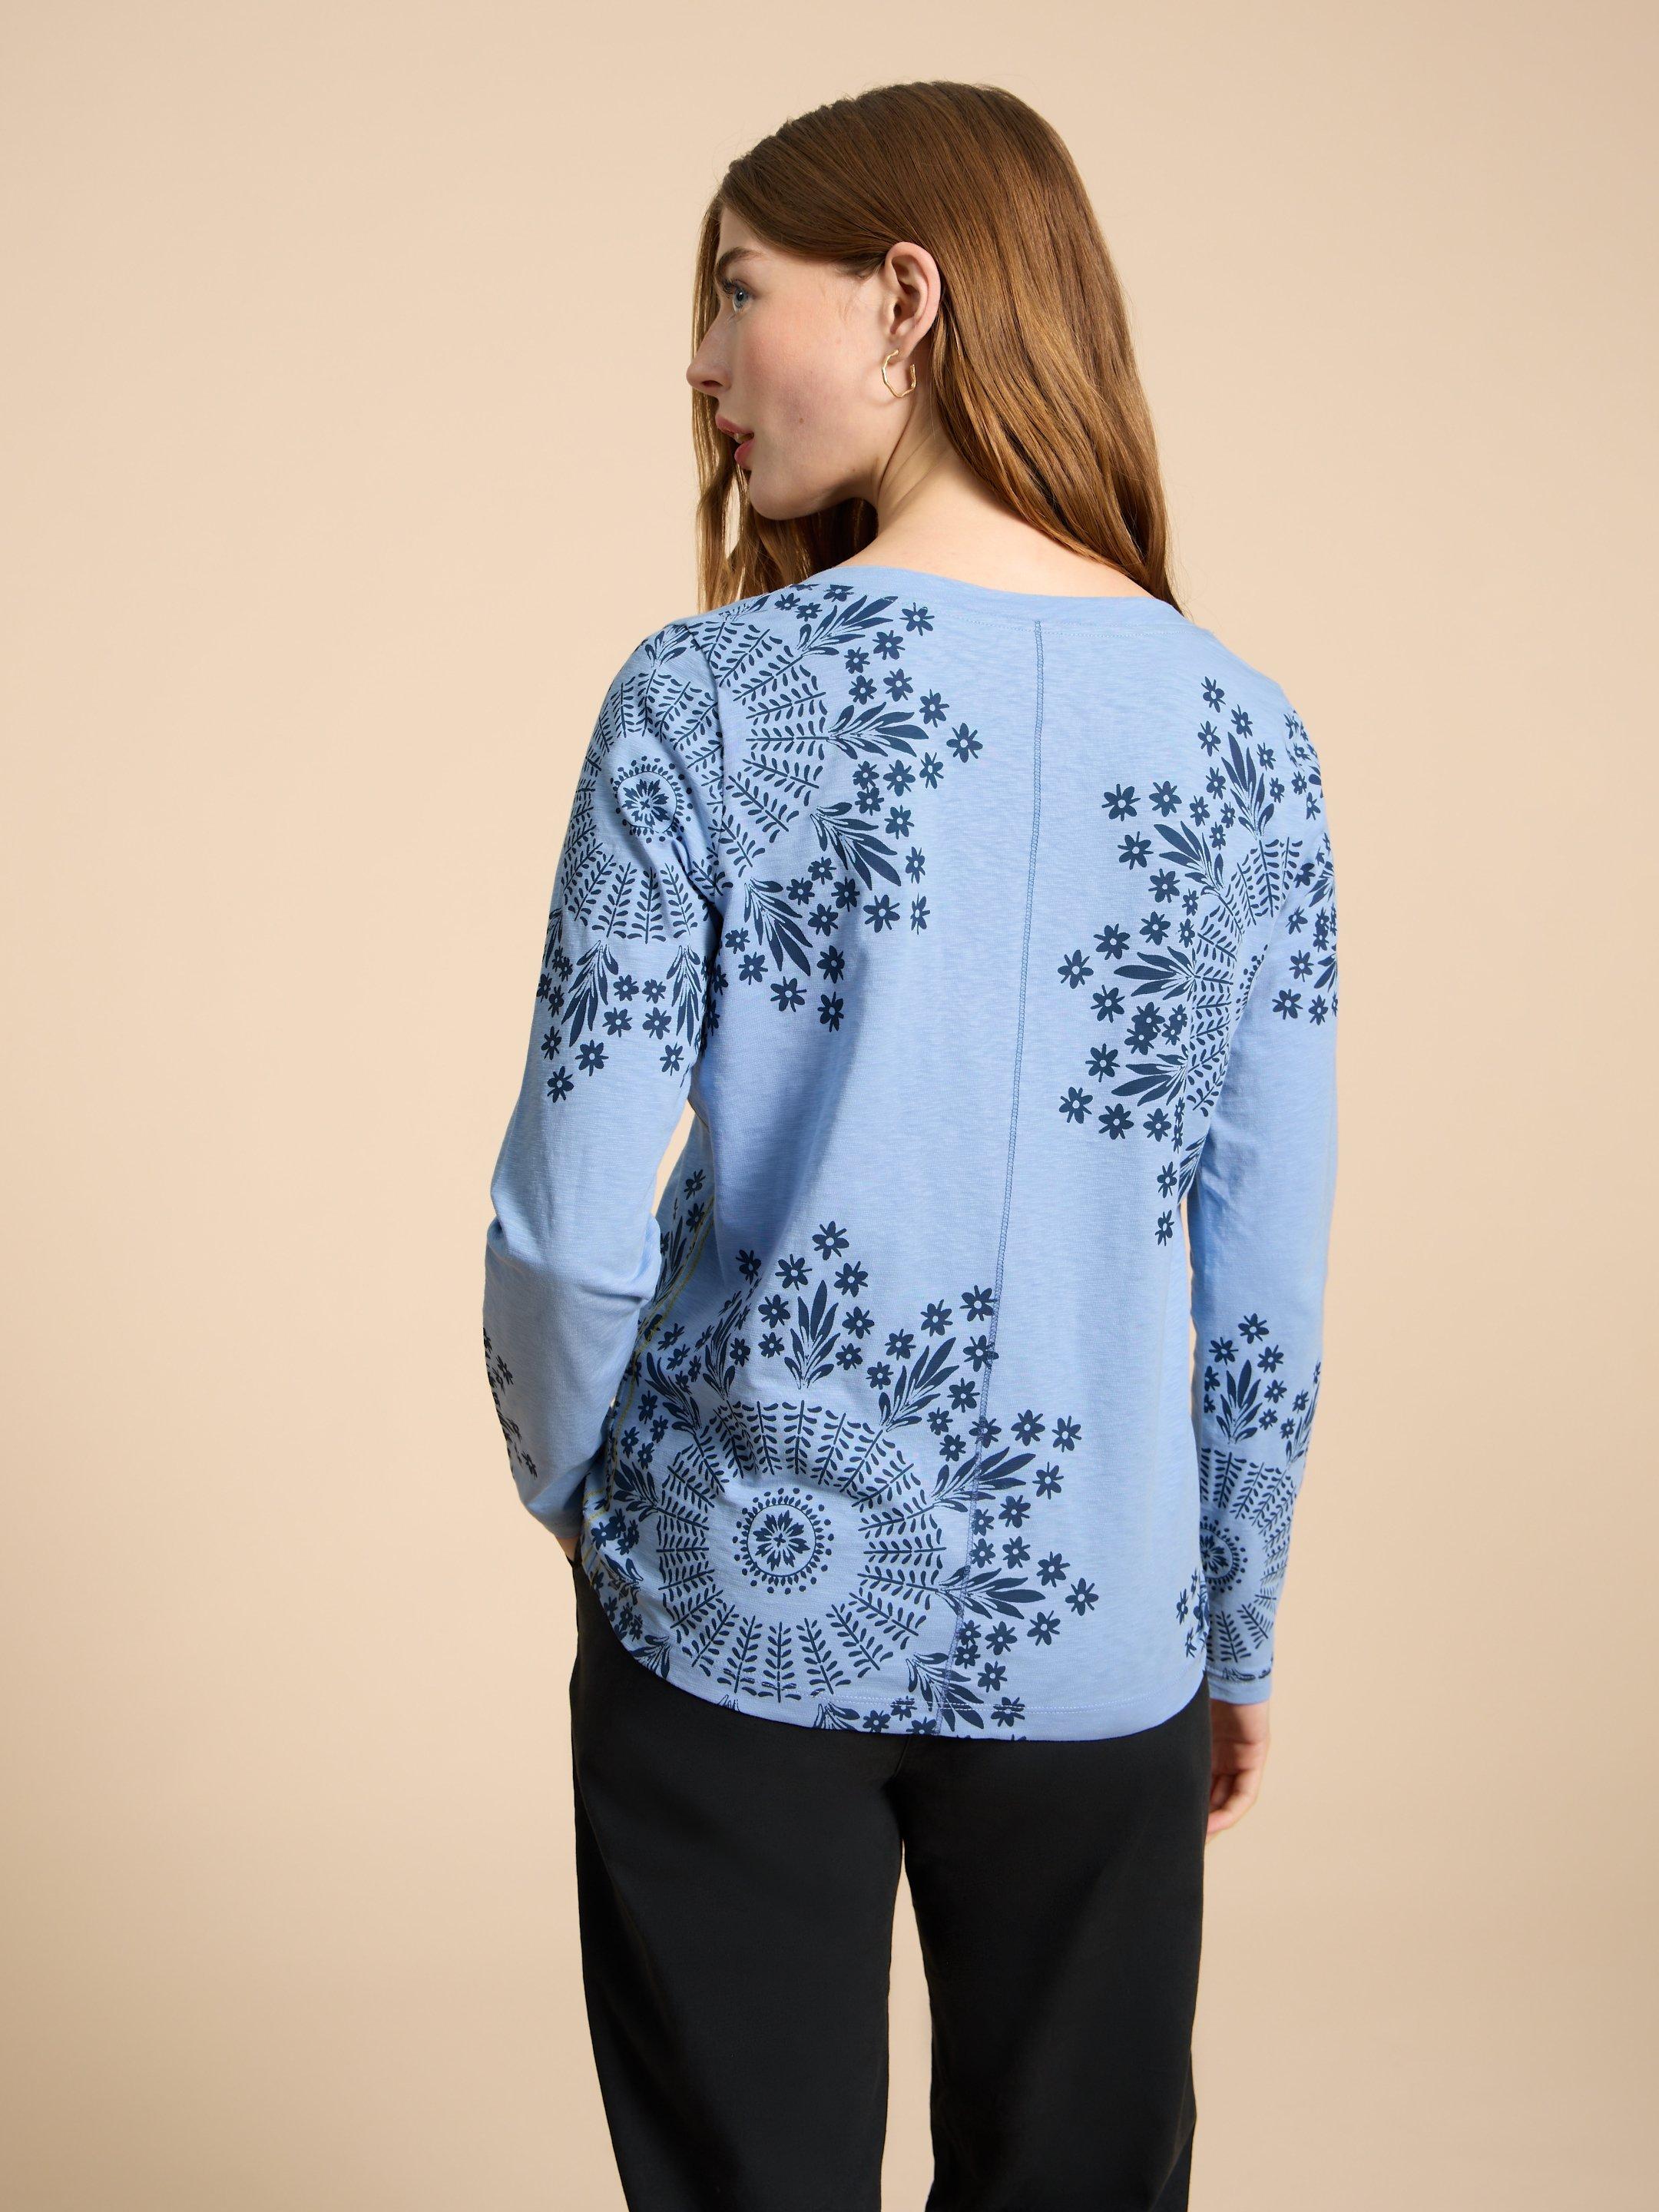 NELLY LS PRINTED TEE in BLUE MLT - MODEL BACK